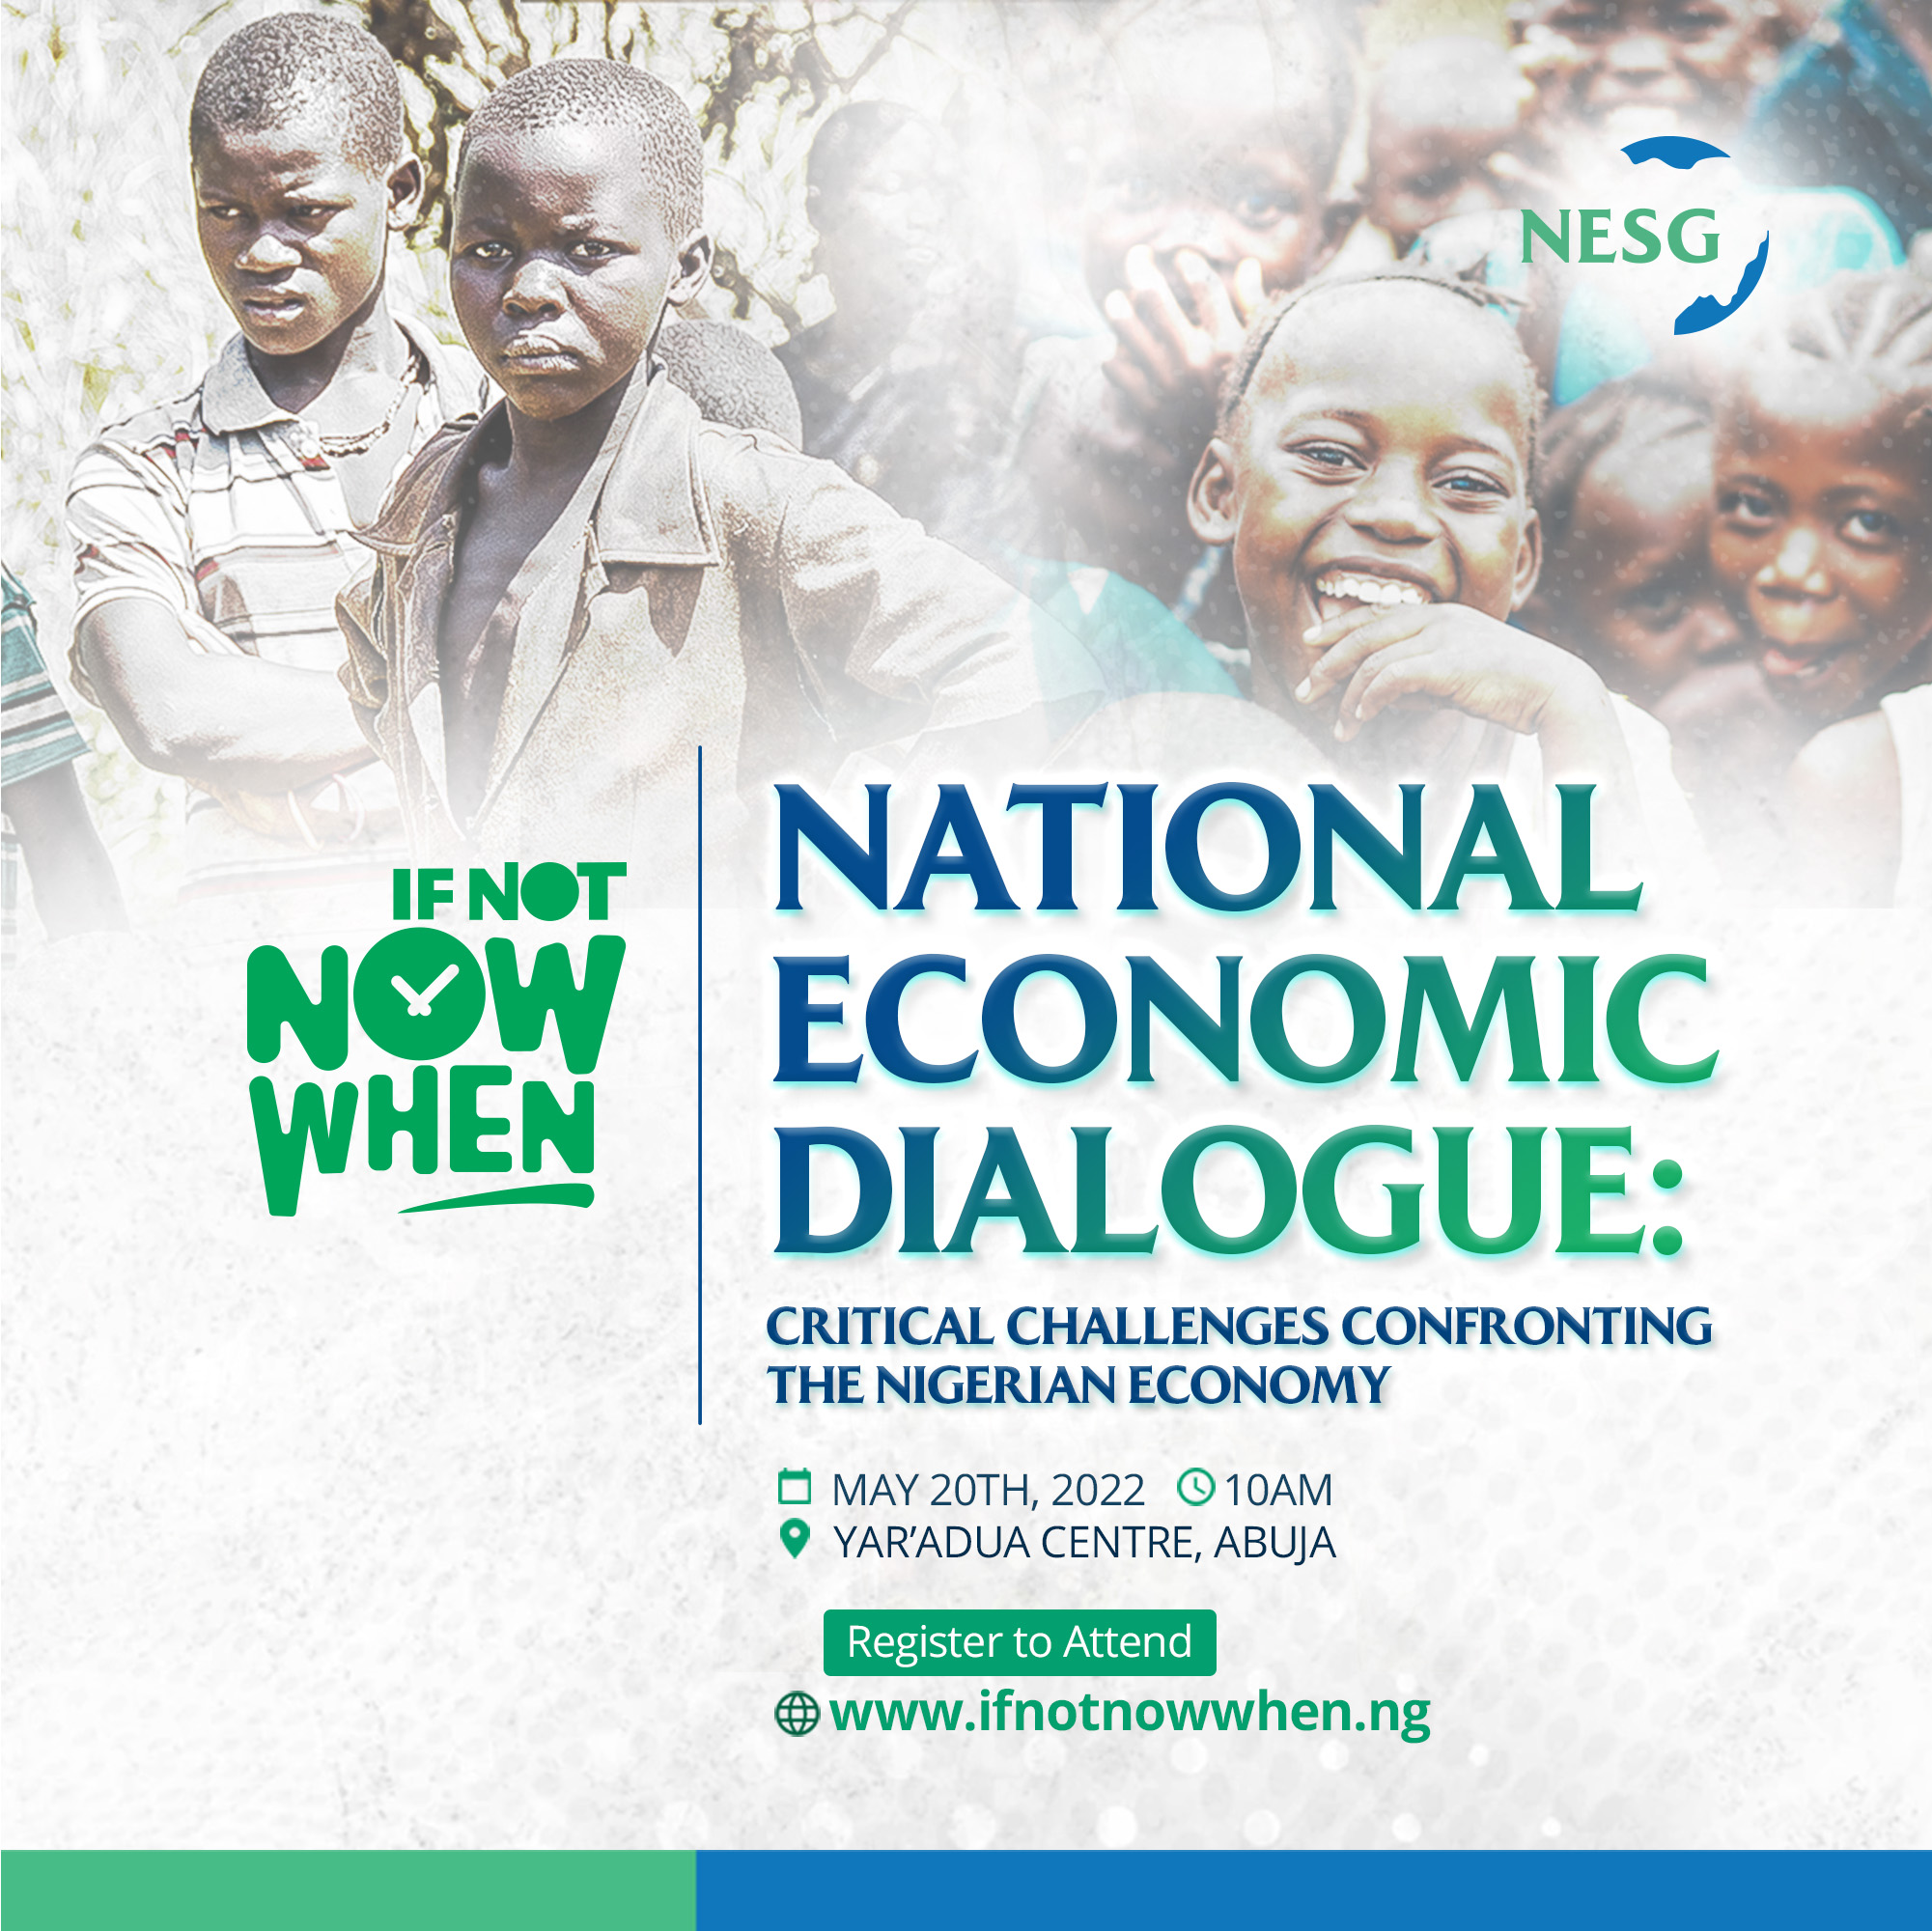 NESG to hold National Economic Dialogue to confront the Critical Challenges Confronting the Nigerian Economy,  The Nigerian Economic Summit Group